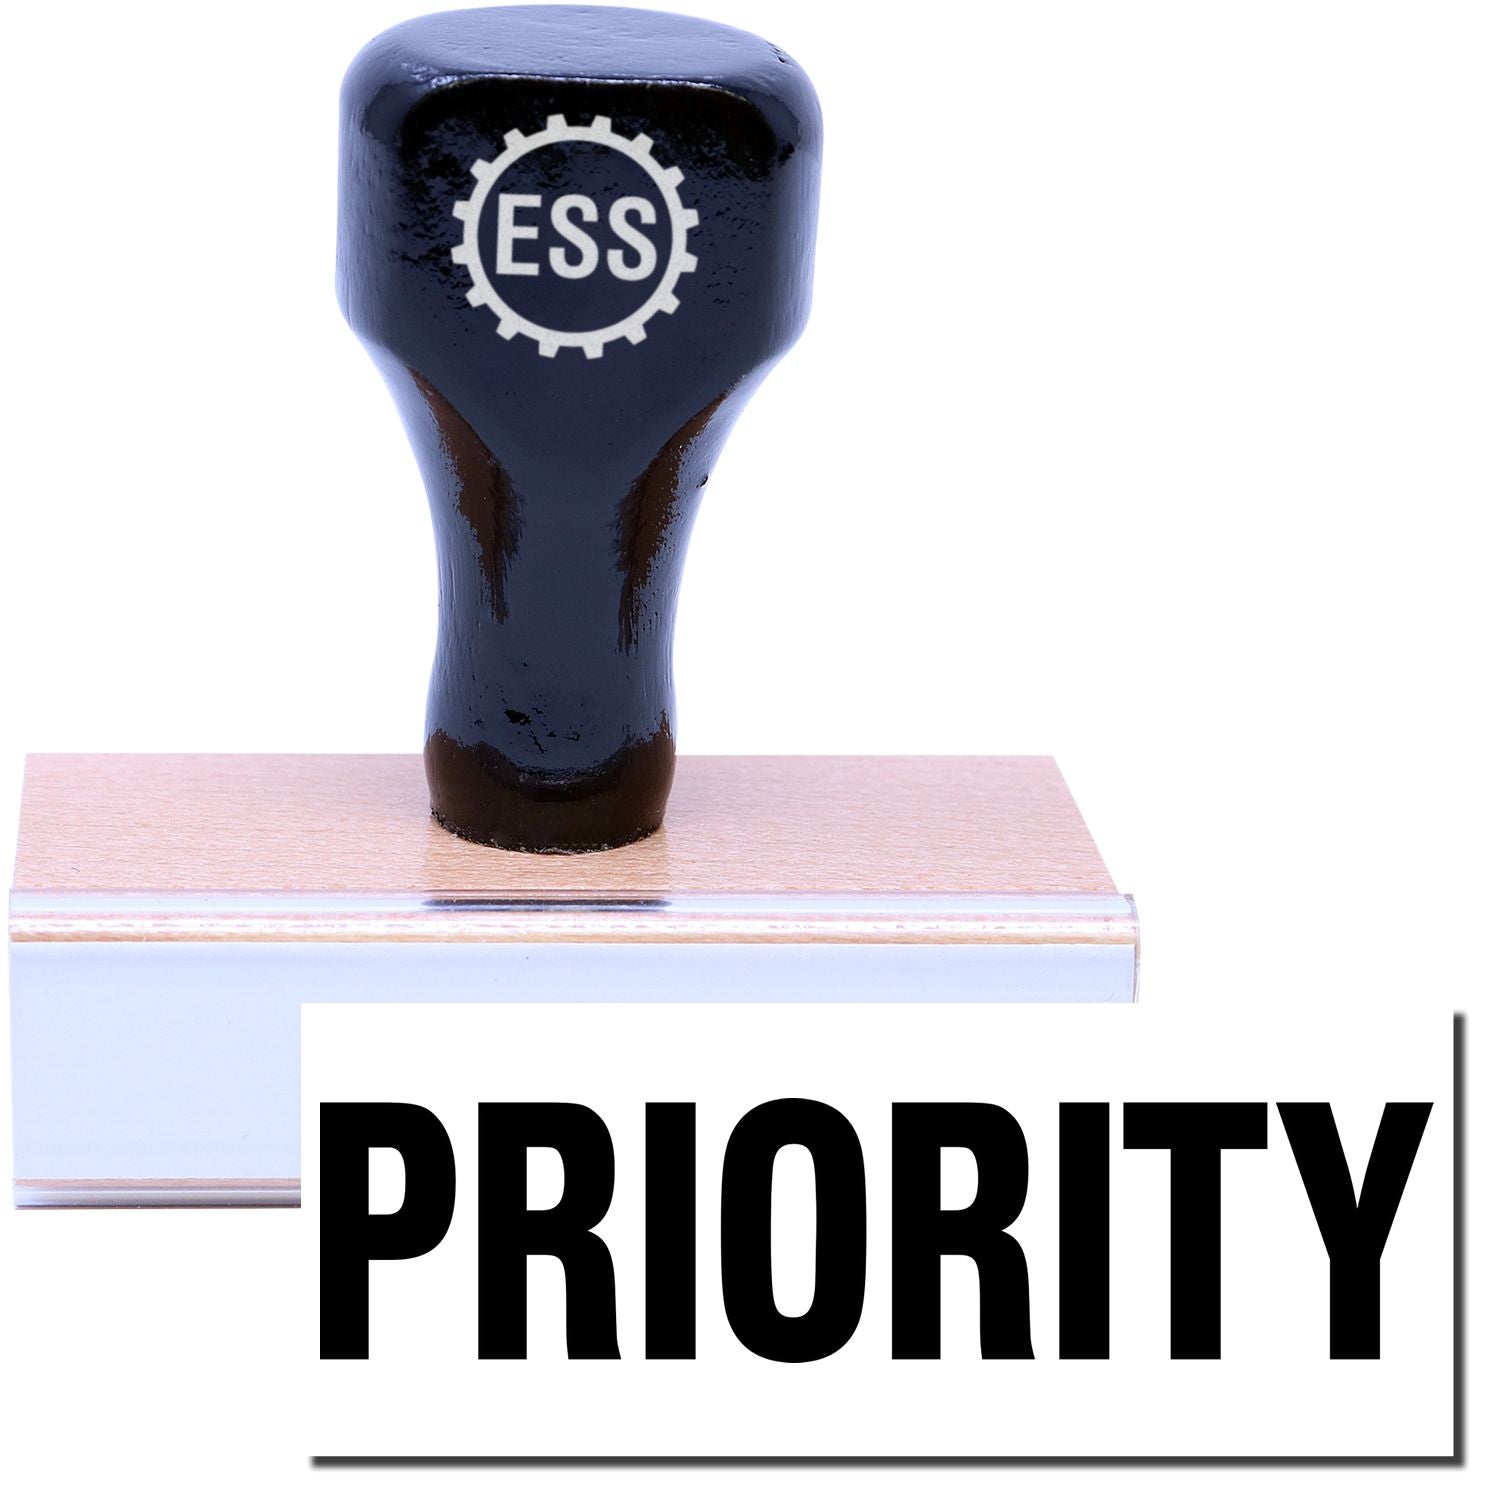 A stock office rubber stamp with a stamped image showing how the text "PRIORITY" in bold font is displayed after stamping.